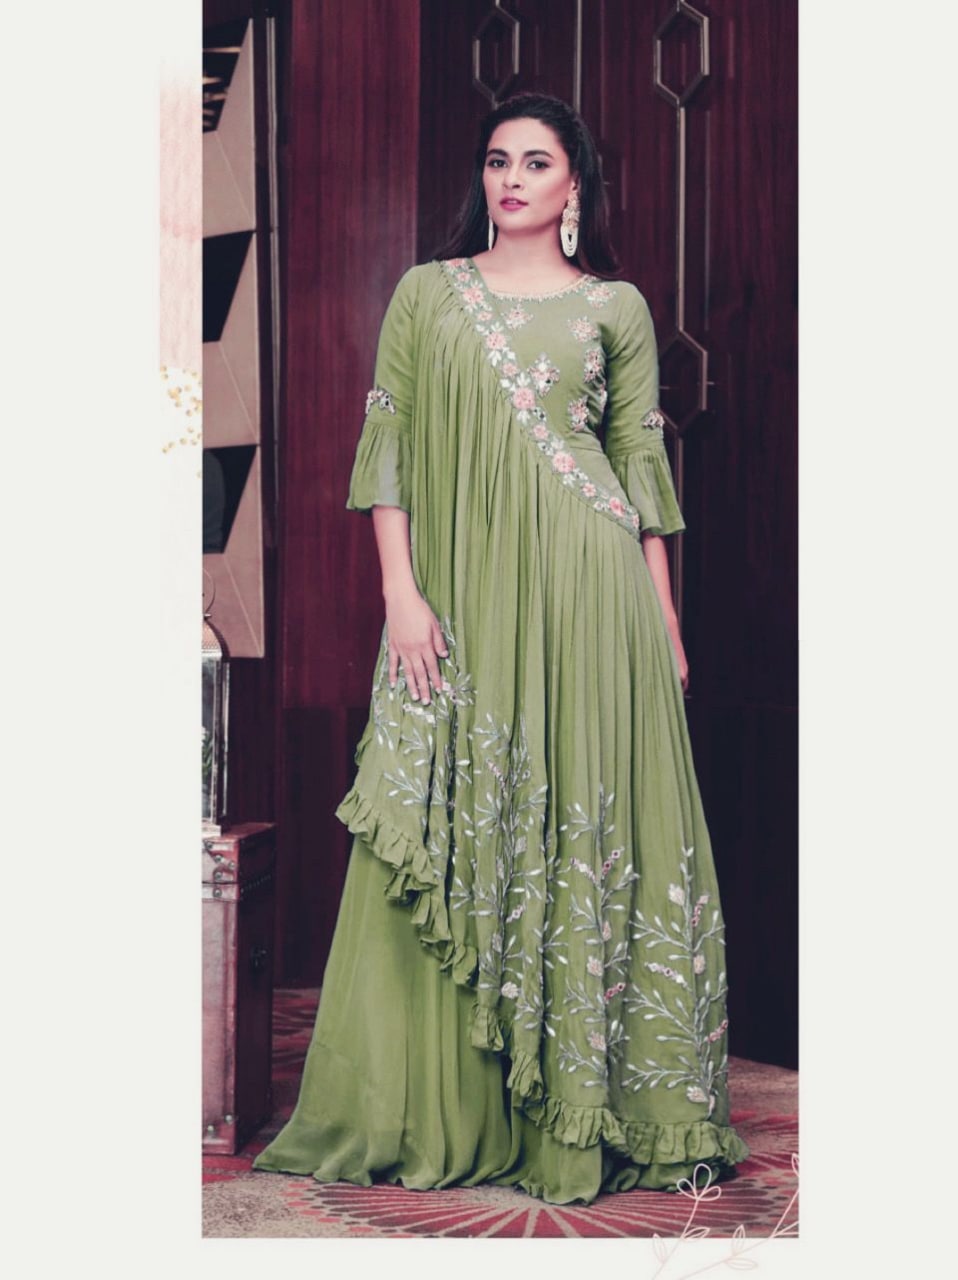 Shop for gowns starting from Rs. 599 /- Only on #bollywoodkart A complete  women fashion store Buy at :- https:… | Party wear dresses, Gowns dresses,  Gown party wear